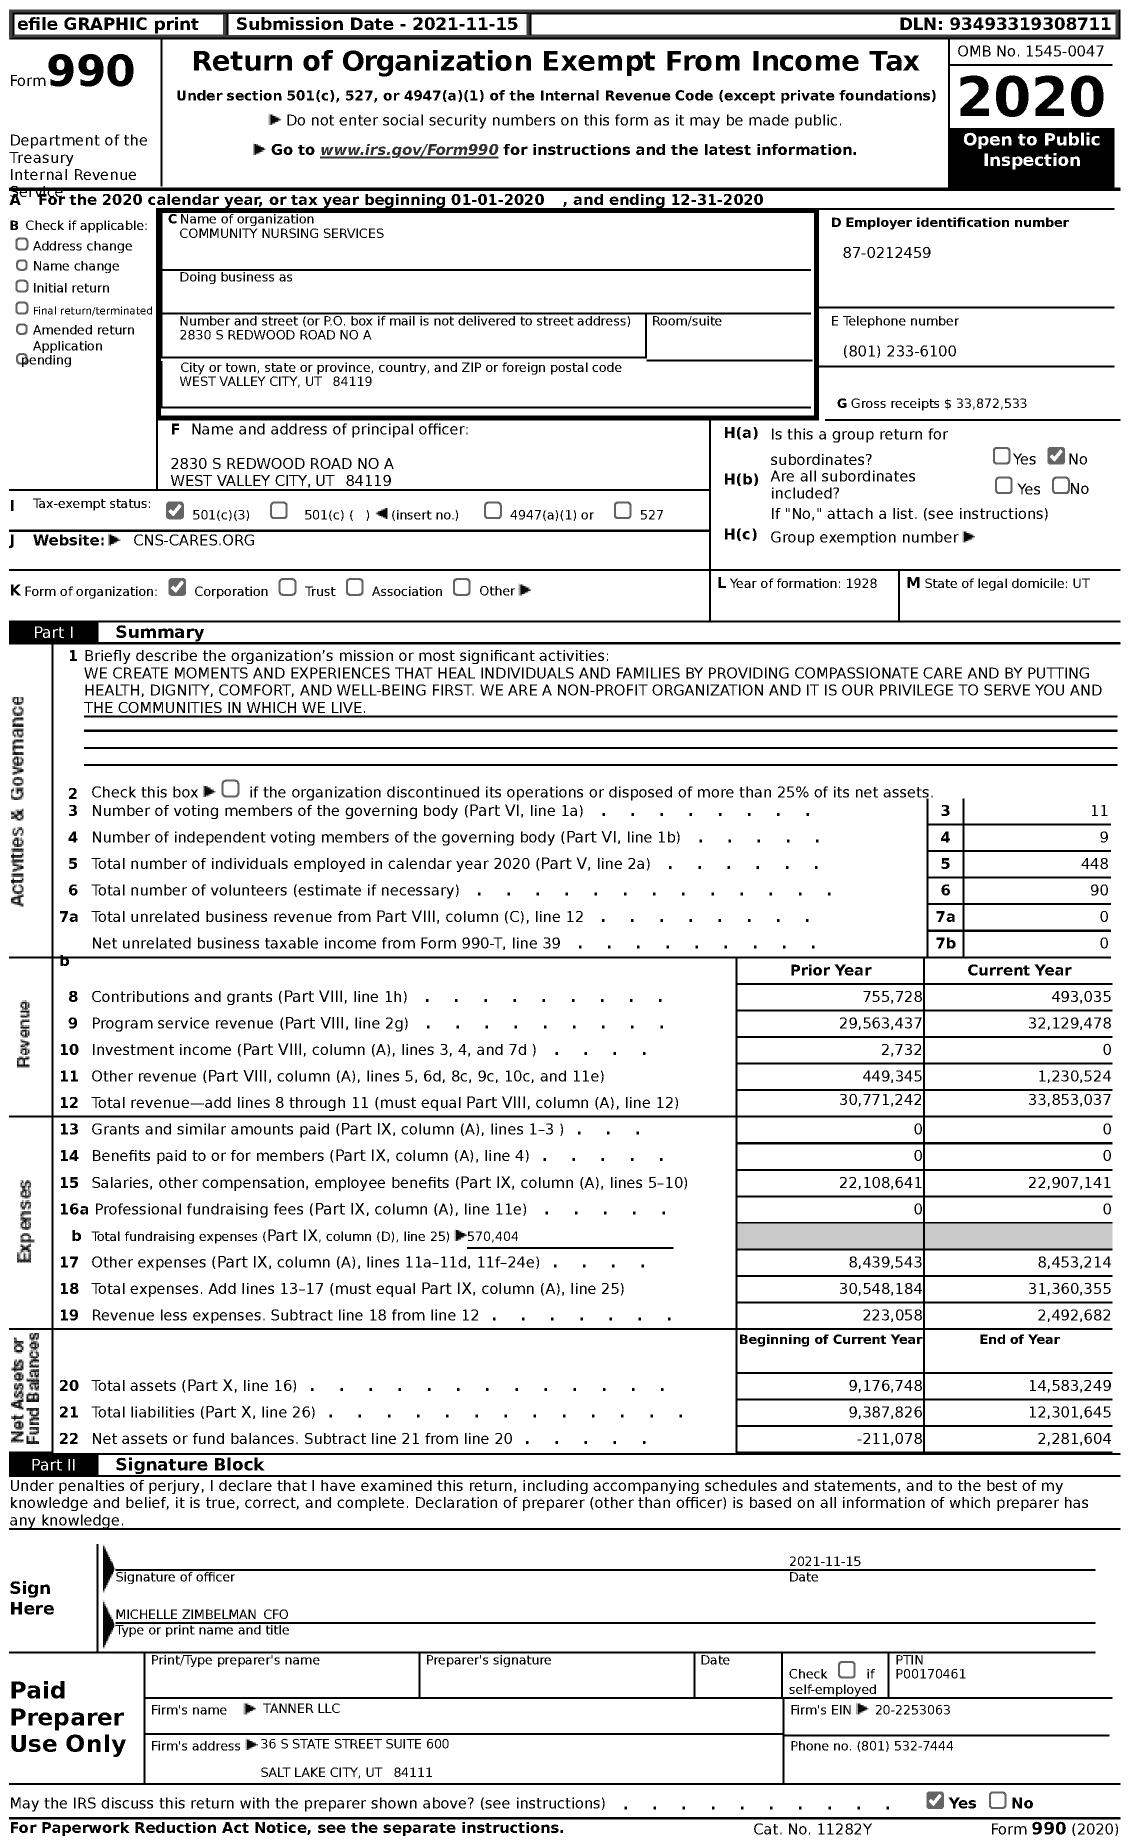 Image of first page of 2020 Form 990 for Community Nursing Services (CNS)